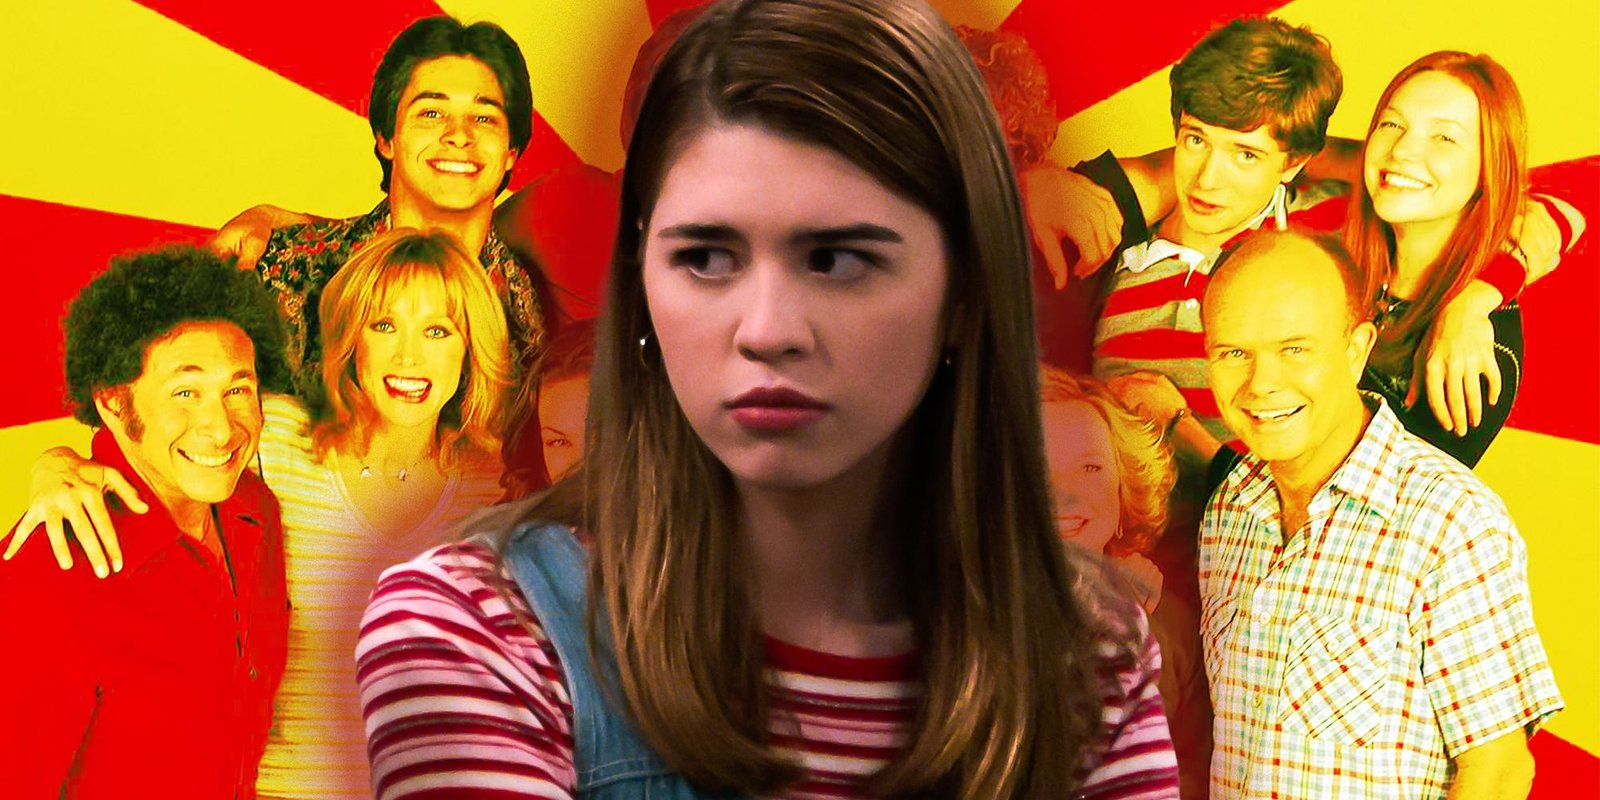 That '90s Show May Have Just Confirmed The Death Of A Major Original That '70s Show Character